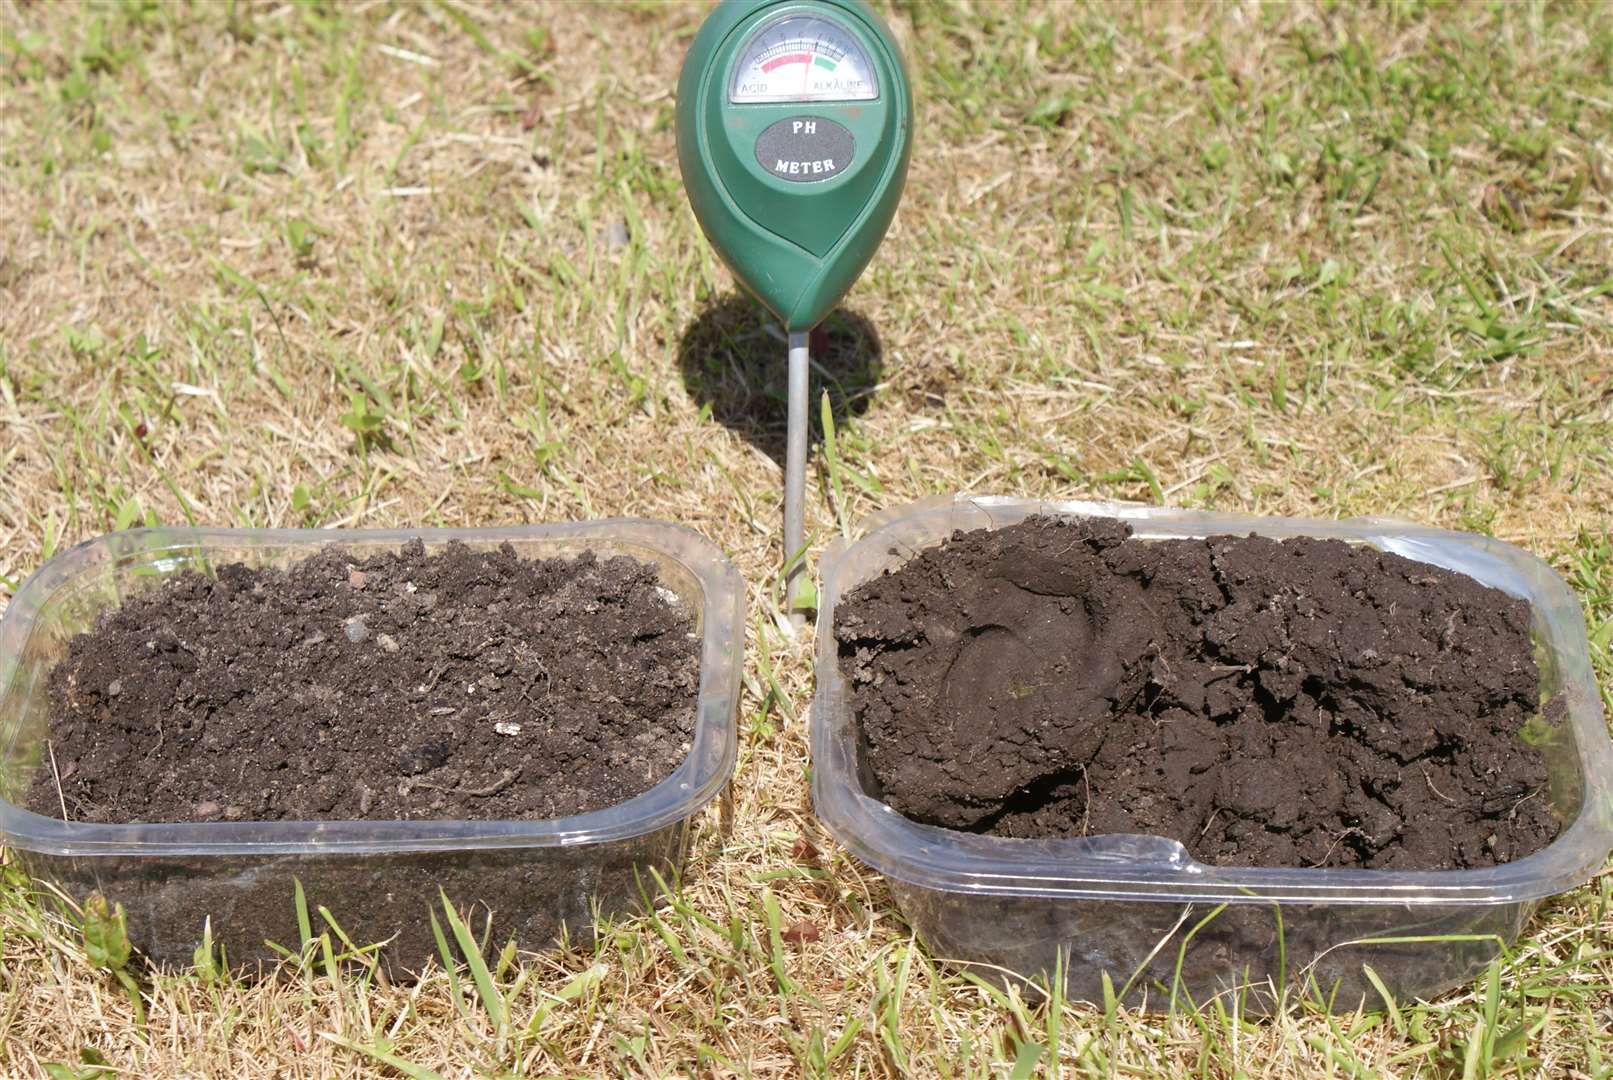 The 'virgin' clay soil on the right – note the piece to the left of the sample with the thumbprints in it.  To the left is soil that has been improved by previous occupants – its texture is much more open and friable.  In the center is a pH meter, showing that the soil is neutral at pH 7.